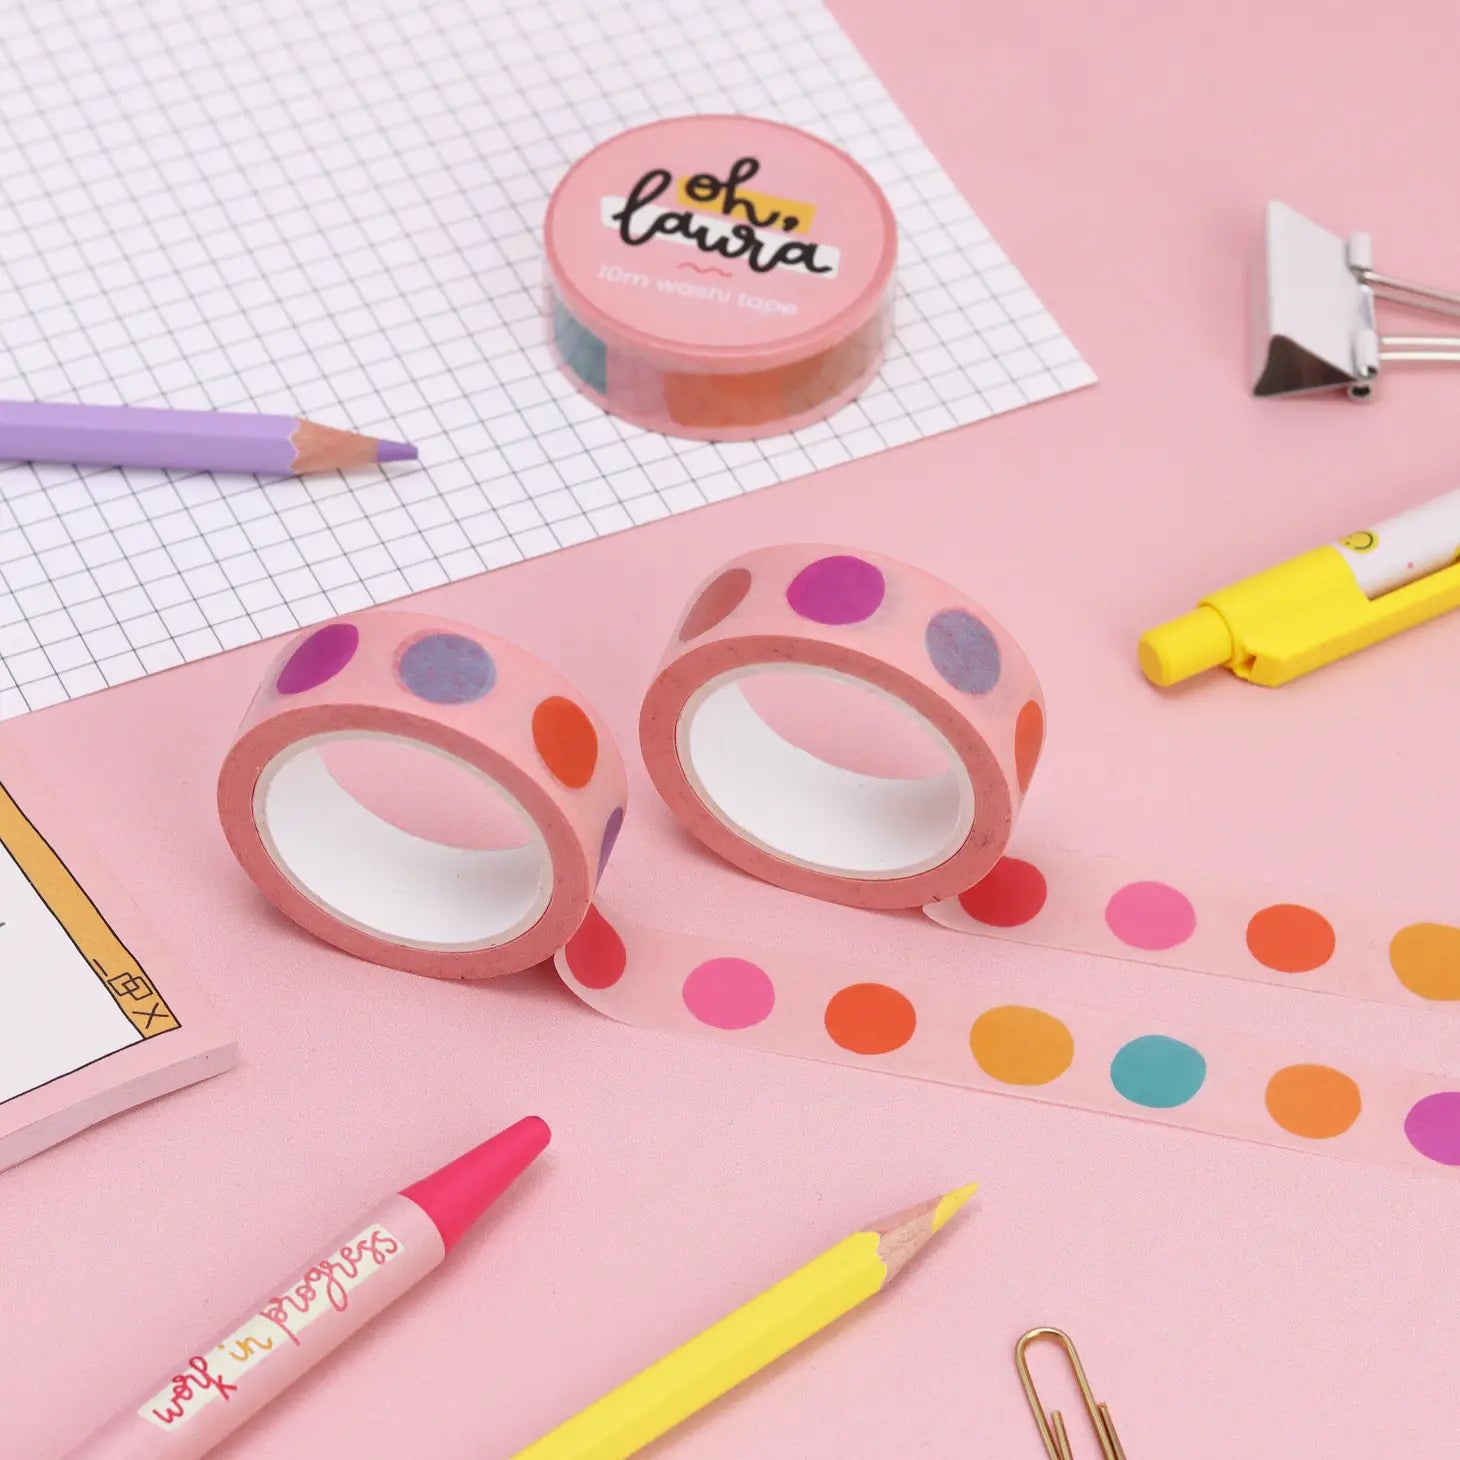 colourful dots washi tape, surrounded by other stationery items.